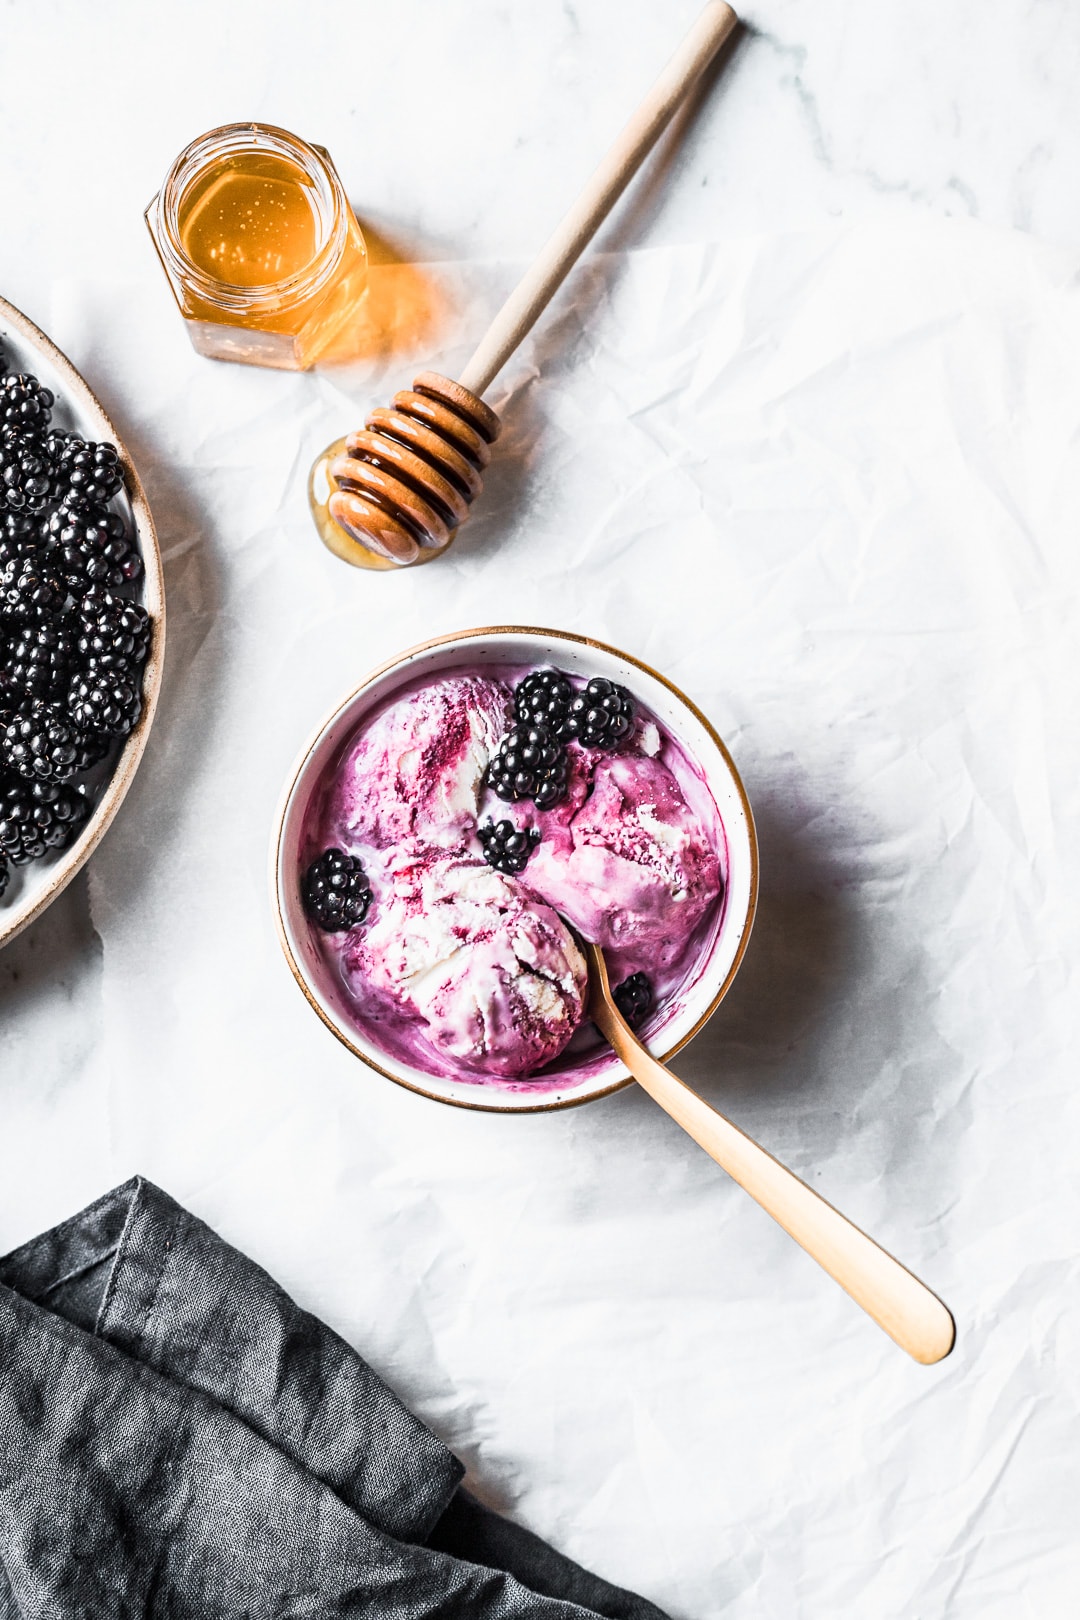 Three scoops of purple and white swirled ice cream in a bowl with honey and blackberries nearby